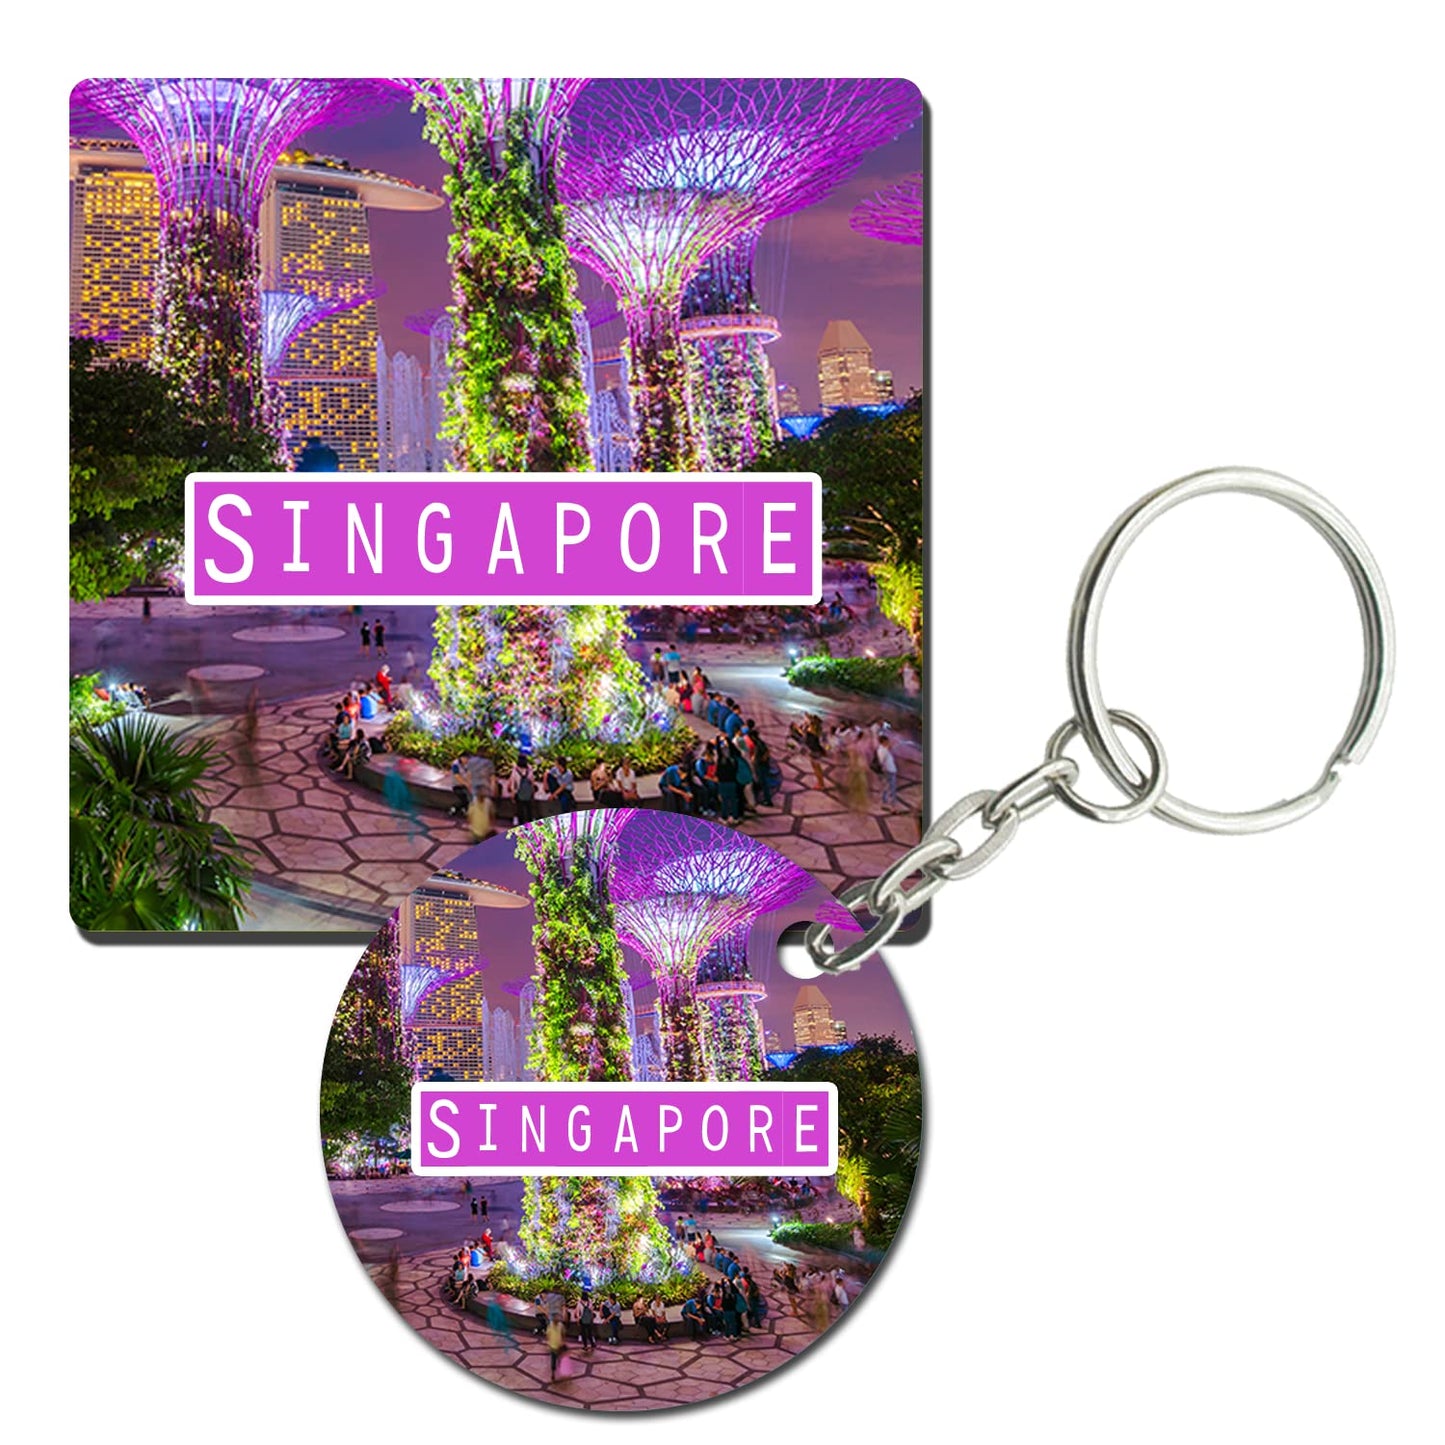 Prints and Cuts Singapore City Set of Fridge Magnet and Key Chain (Combo)